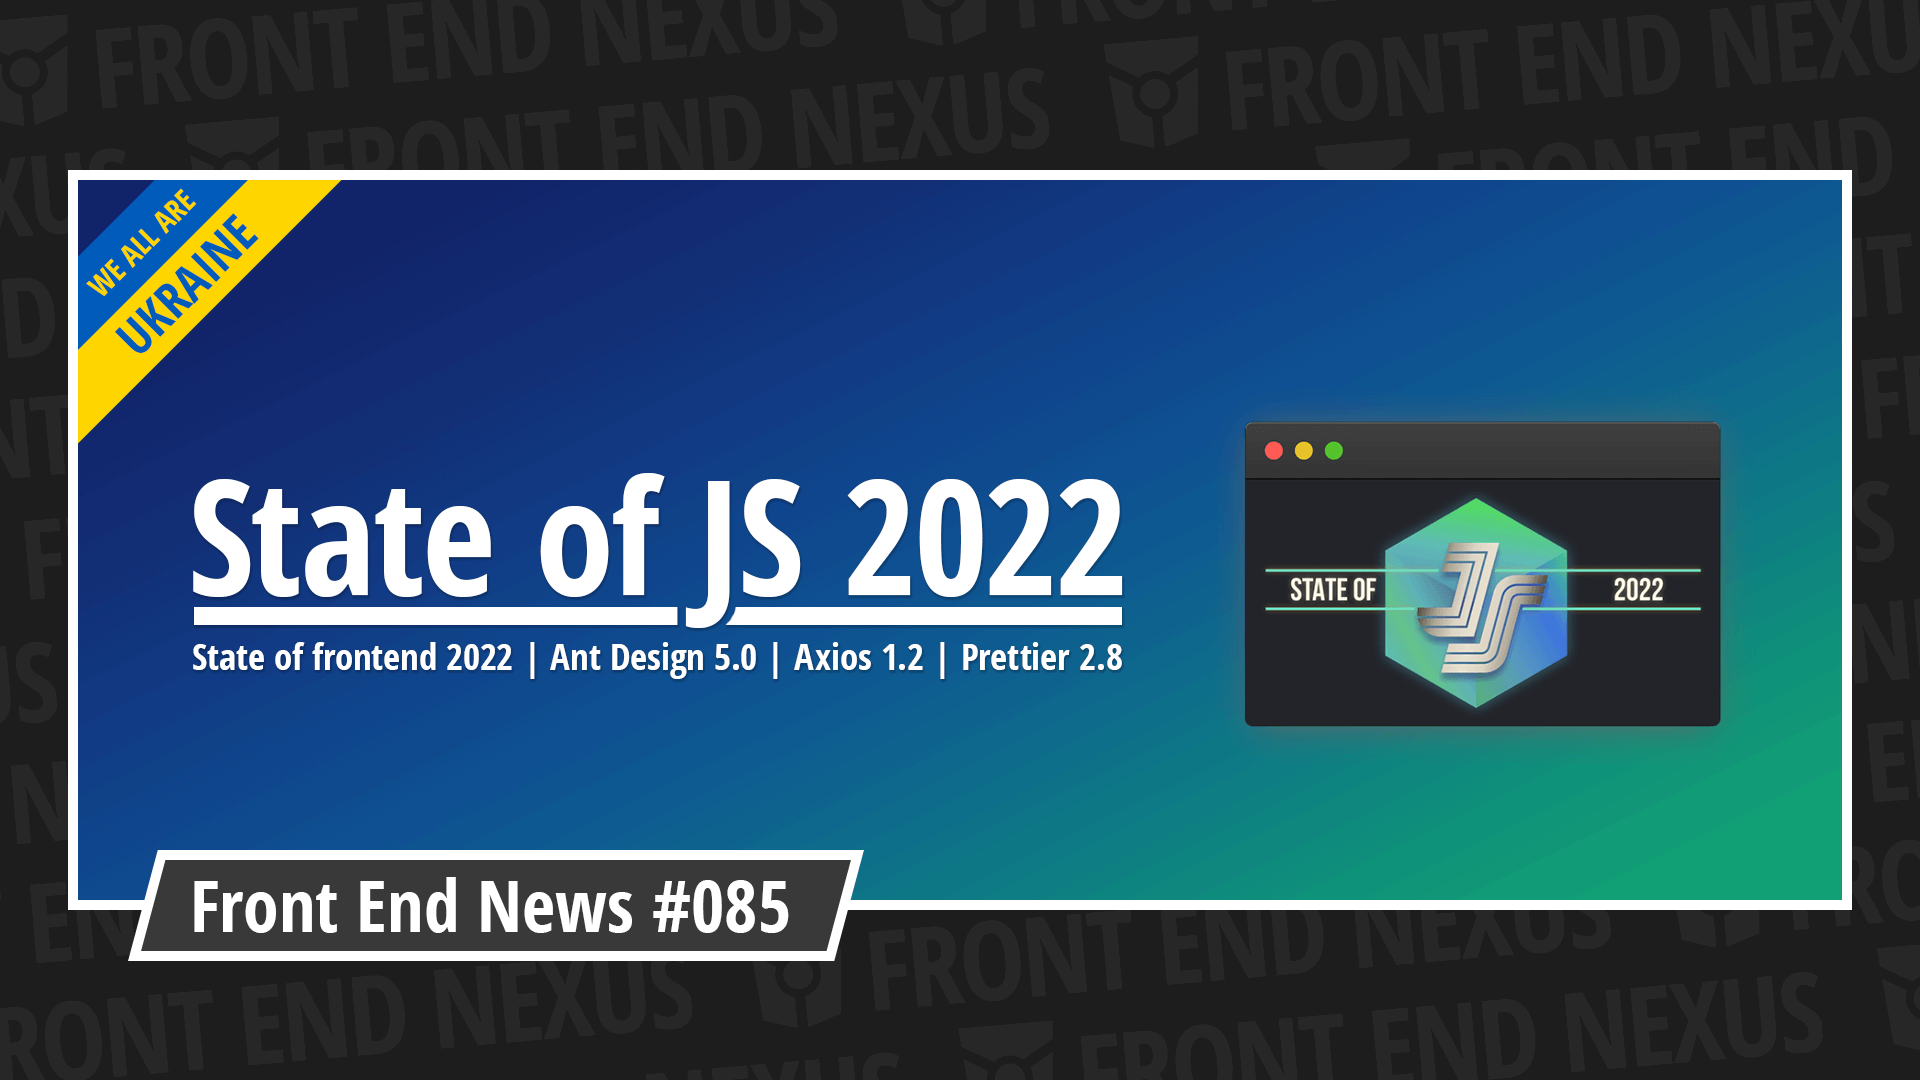 State of JS 2022, State of frontend 2022, Ant Design 5.0, Axios 1.2, Prettier 2.8, and more | Front End News #085